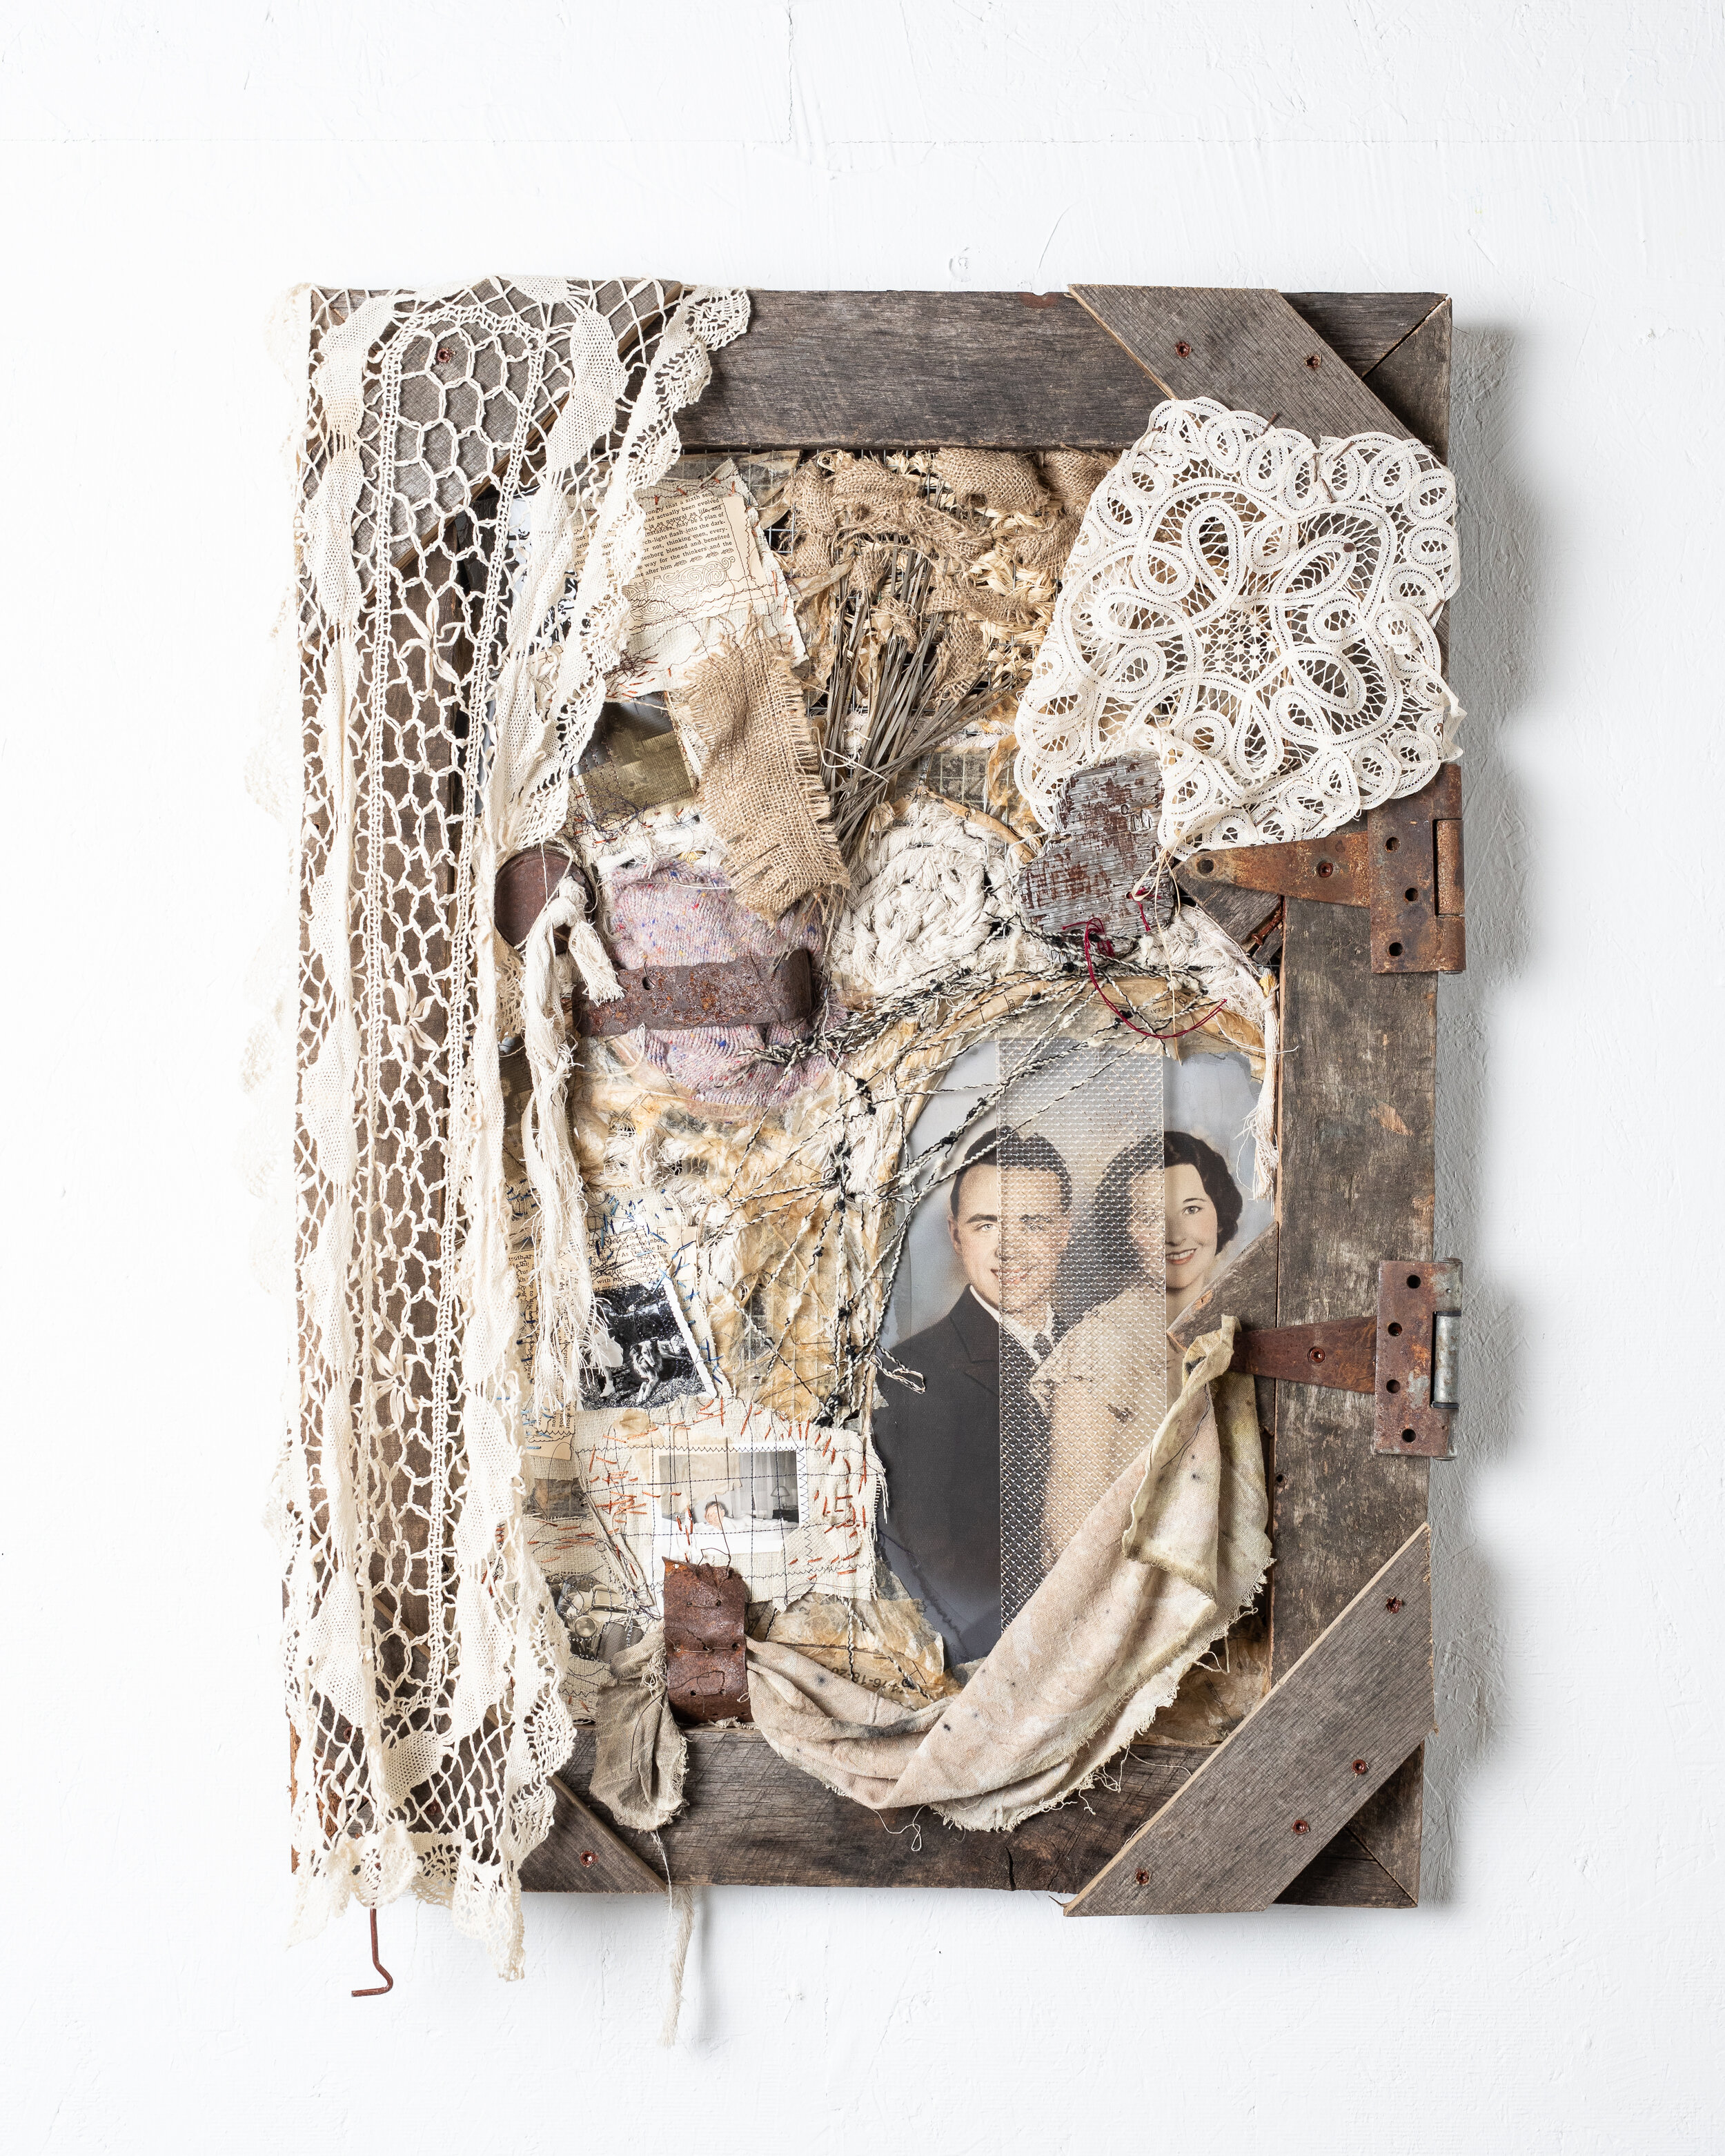    The Ballad of Hazel and Joel     found objects, paper, thread, cloth; 35 x 25 inches 